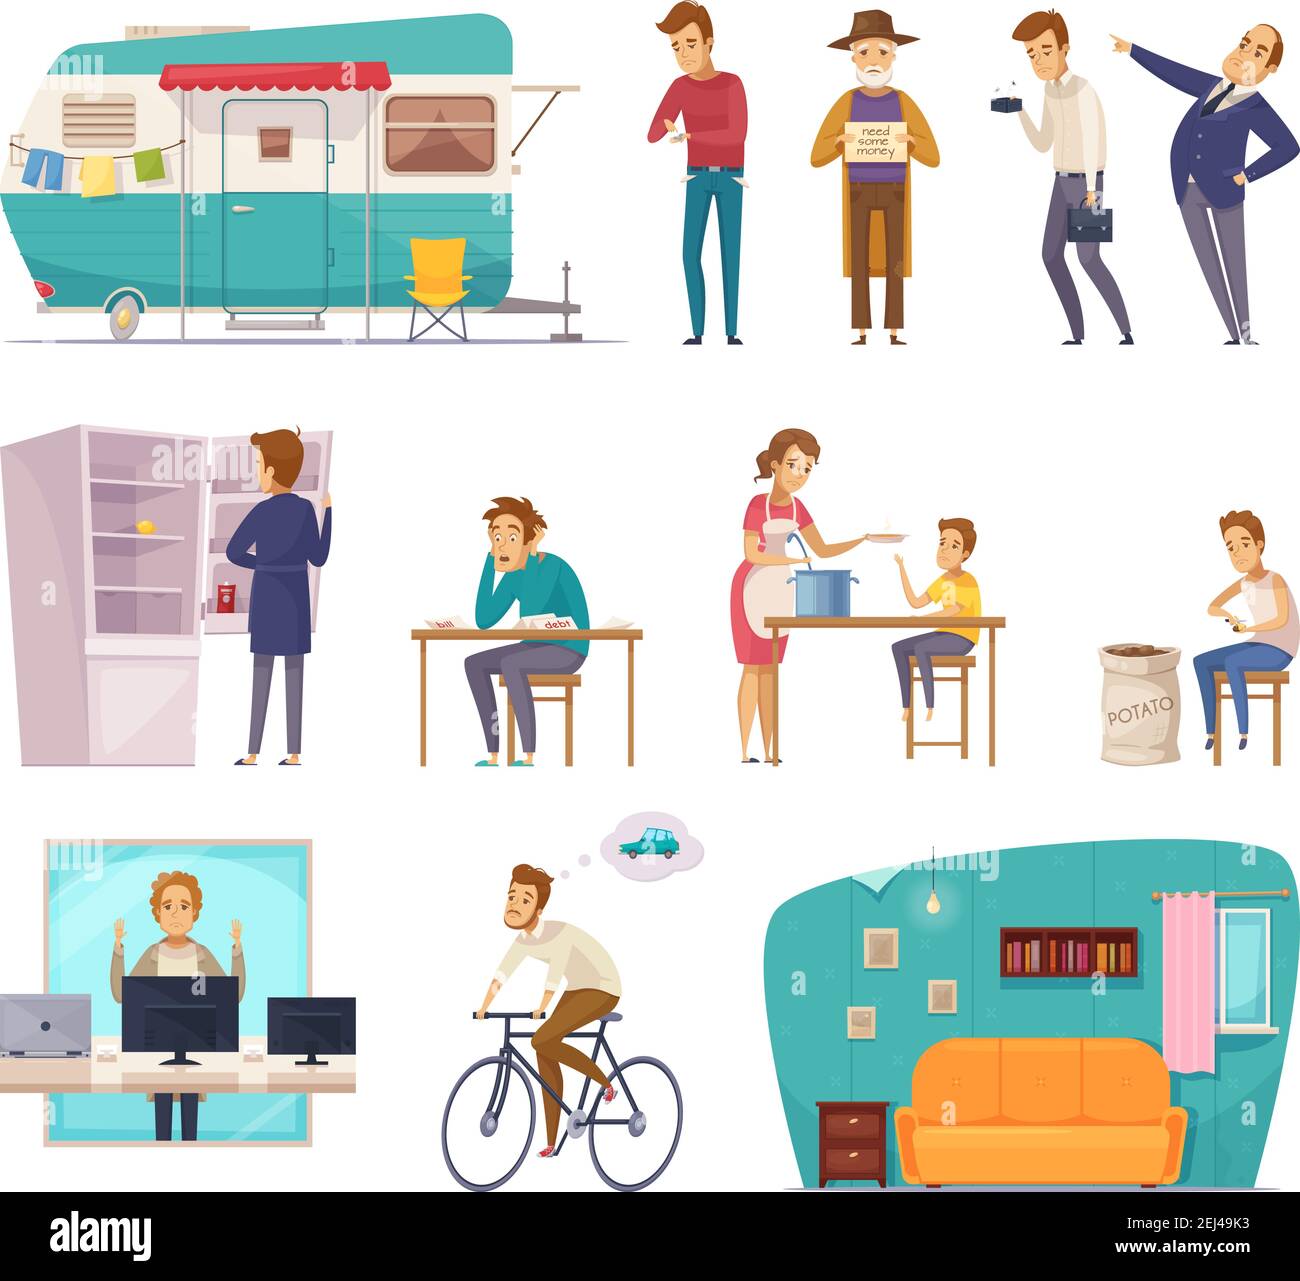 Social classes decorative icons set with rich  poor needy pauper people in home interior and outdoor isolated vector illustration Stock Vector